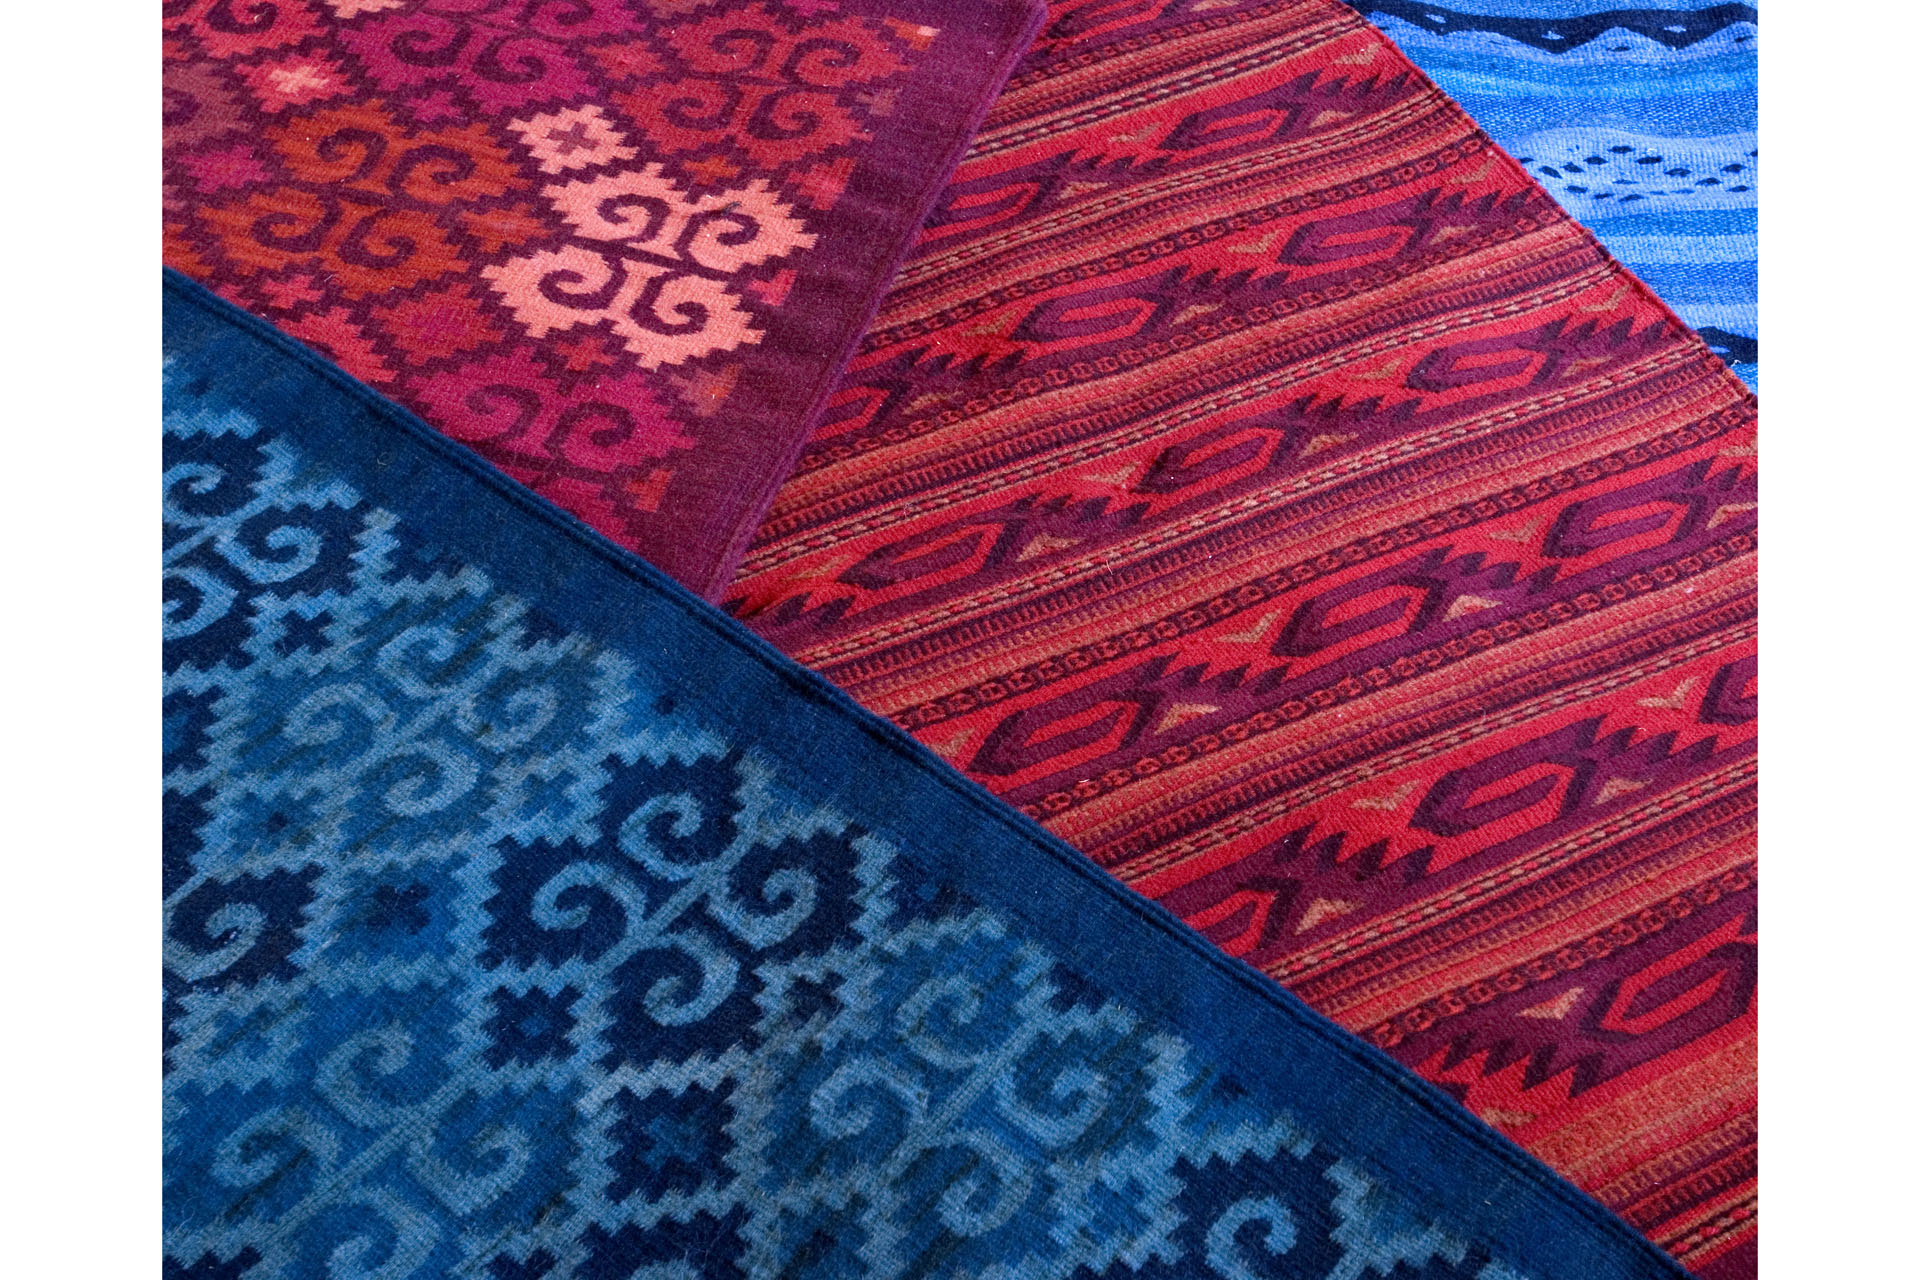 blue and red detailed woven zapotec rugs